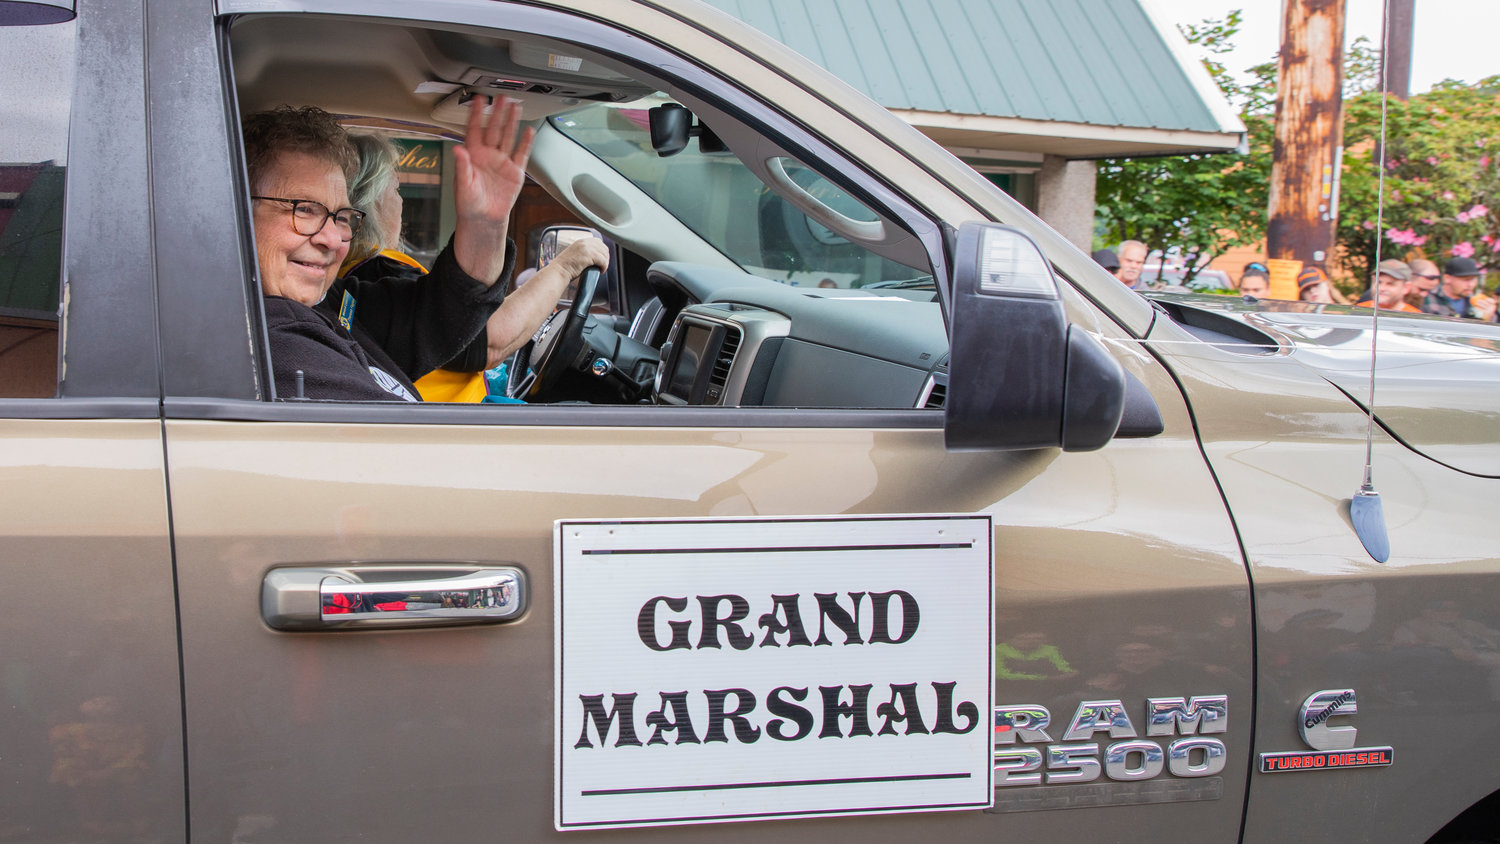 The Egg Days Festival Grand Marshal smiles and waves from a truck during a Saturday parade in Winlock.